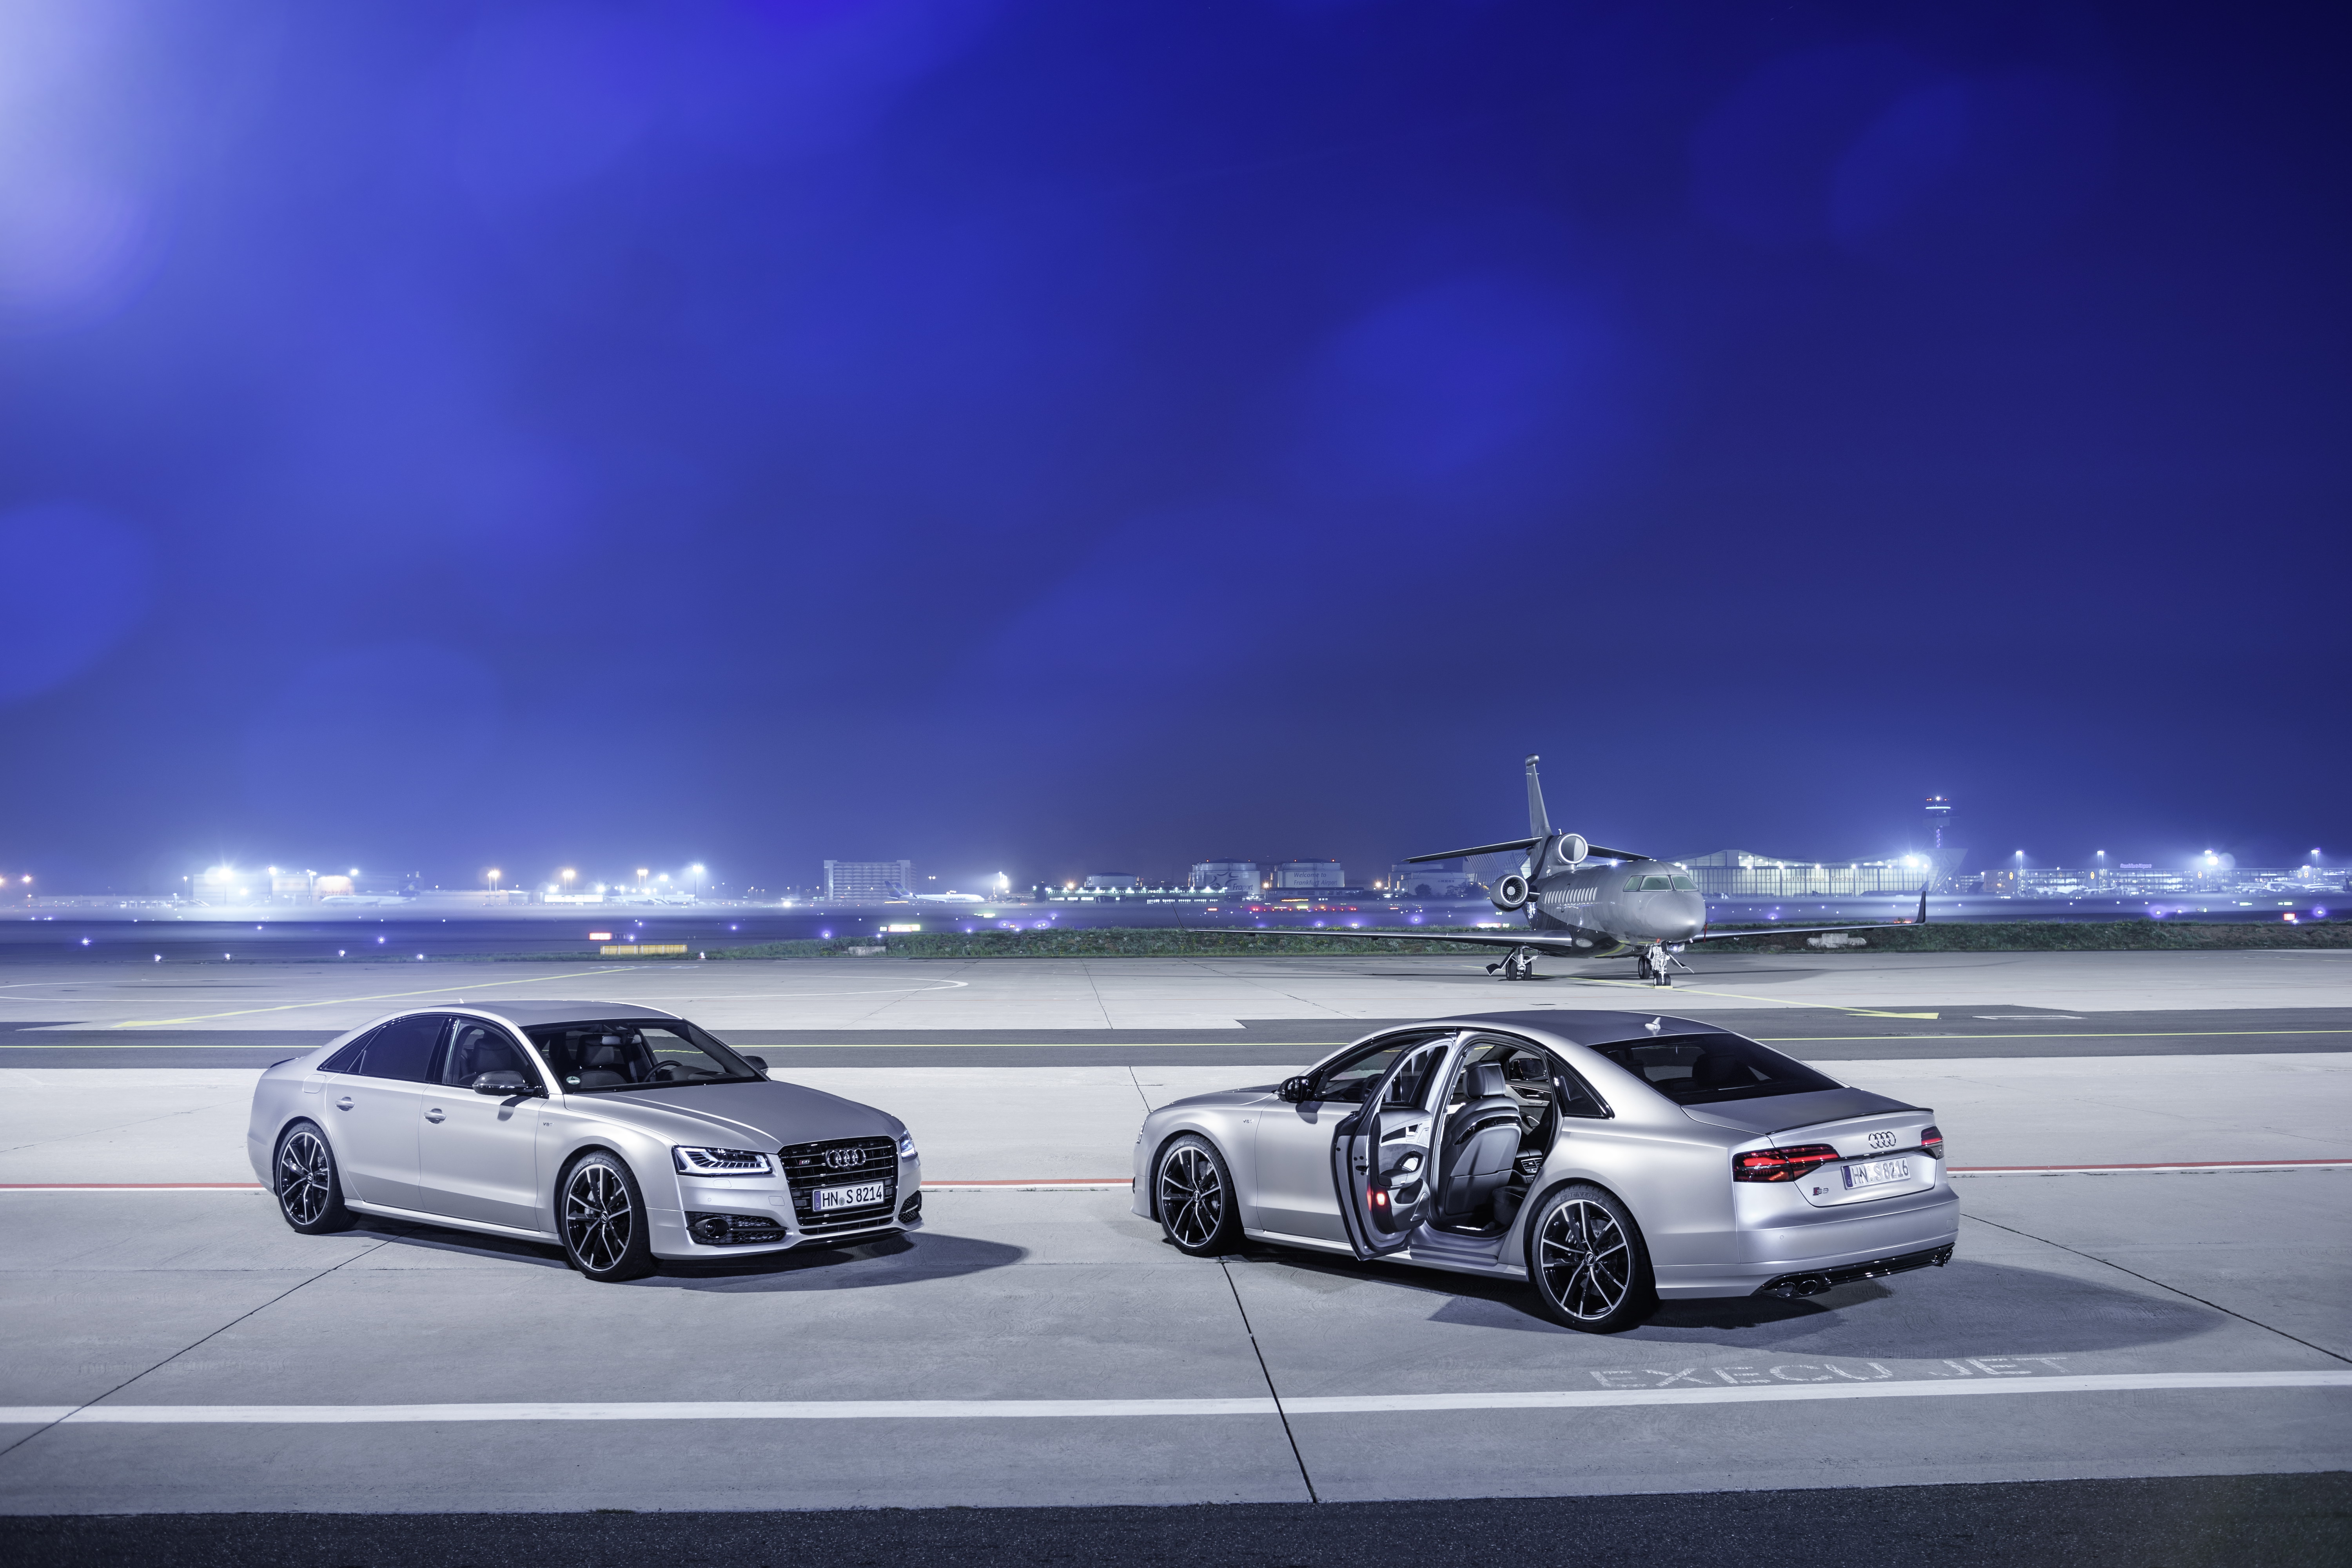 The Audi S8 plus at Frankfurt Airport. by AUDI AG